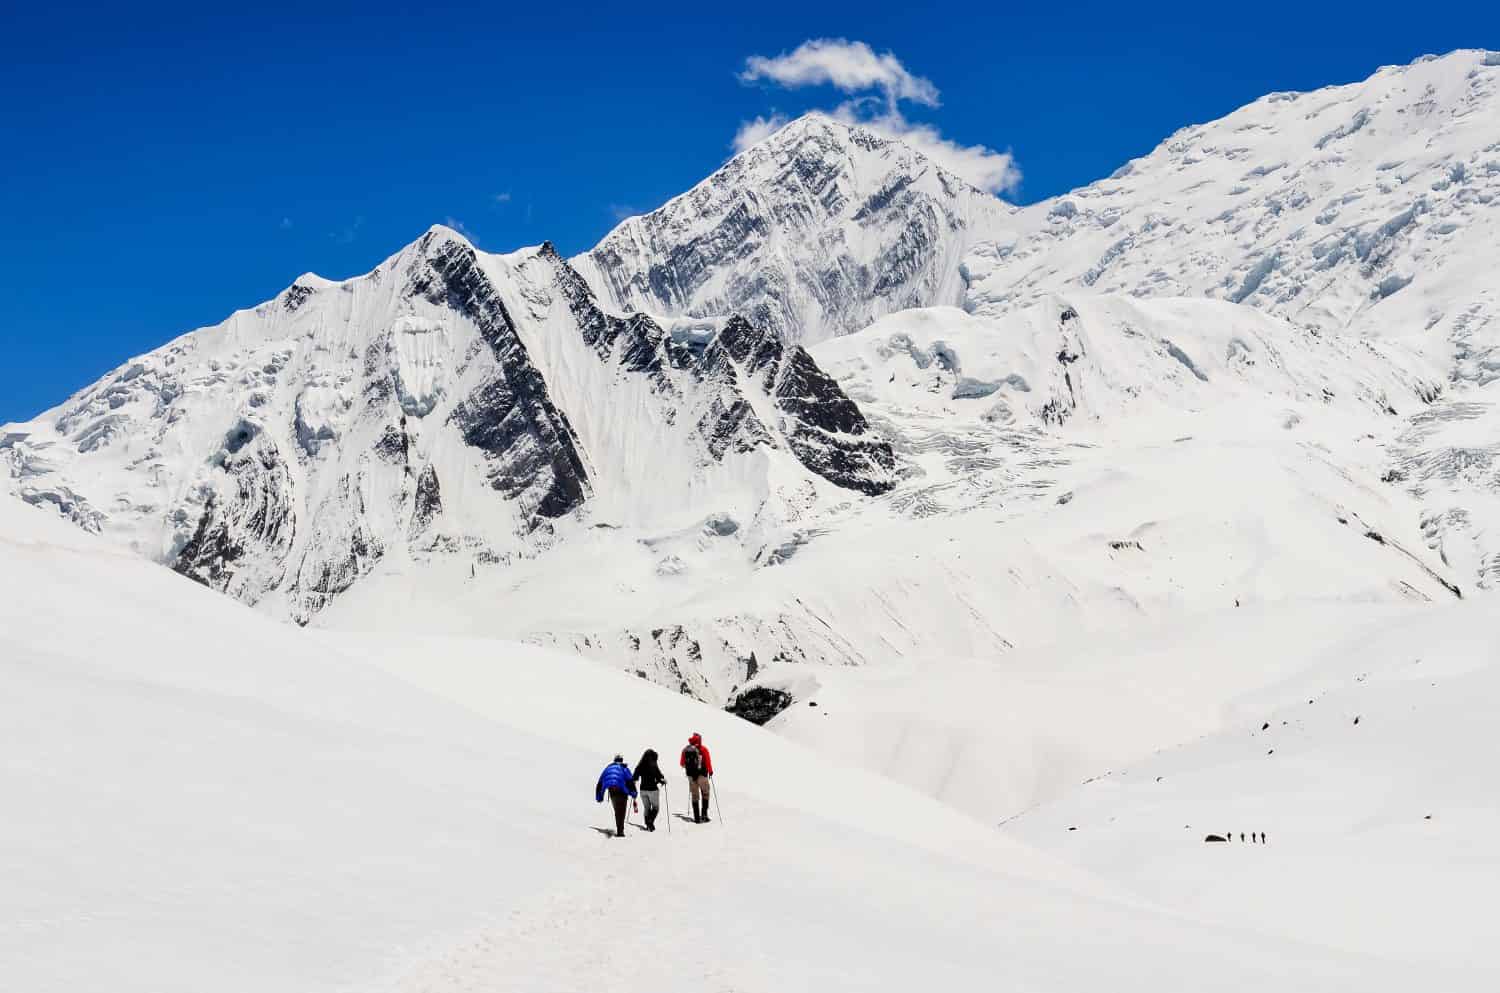 Small group of mountain trekkers in high winter Himalayas mountains, Nepal